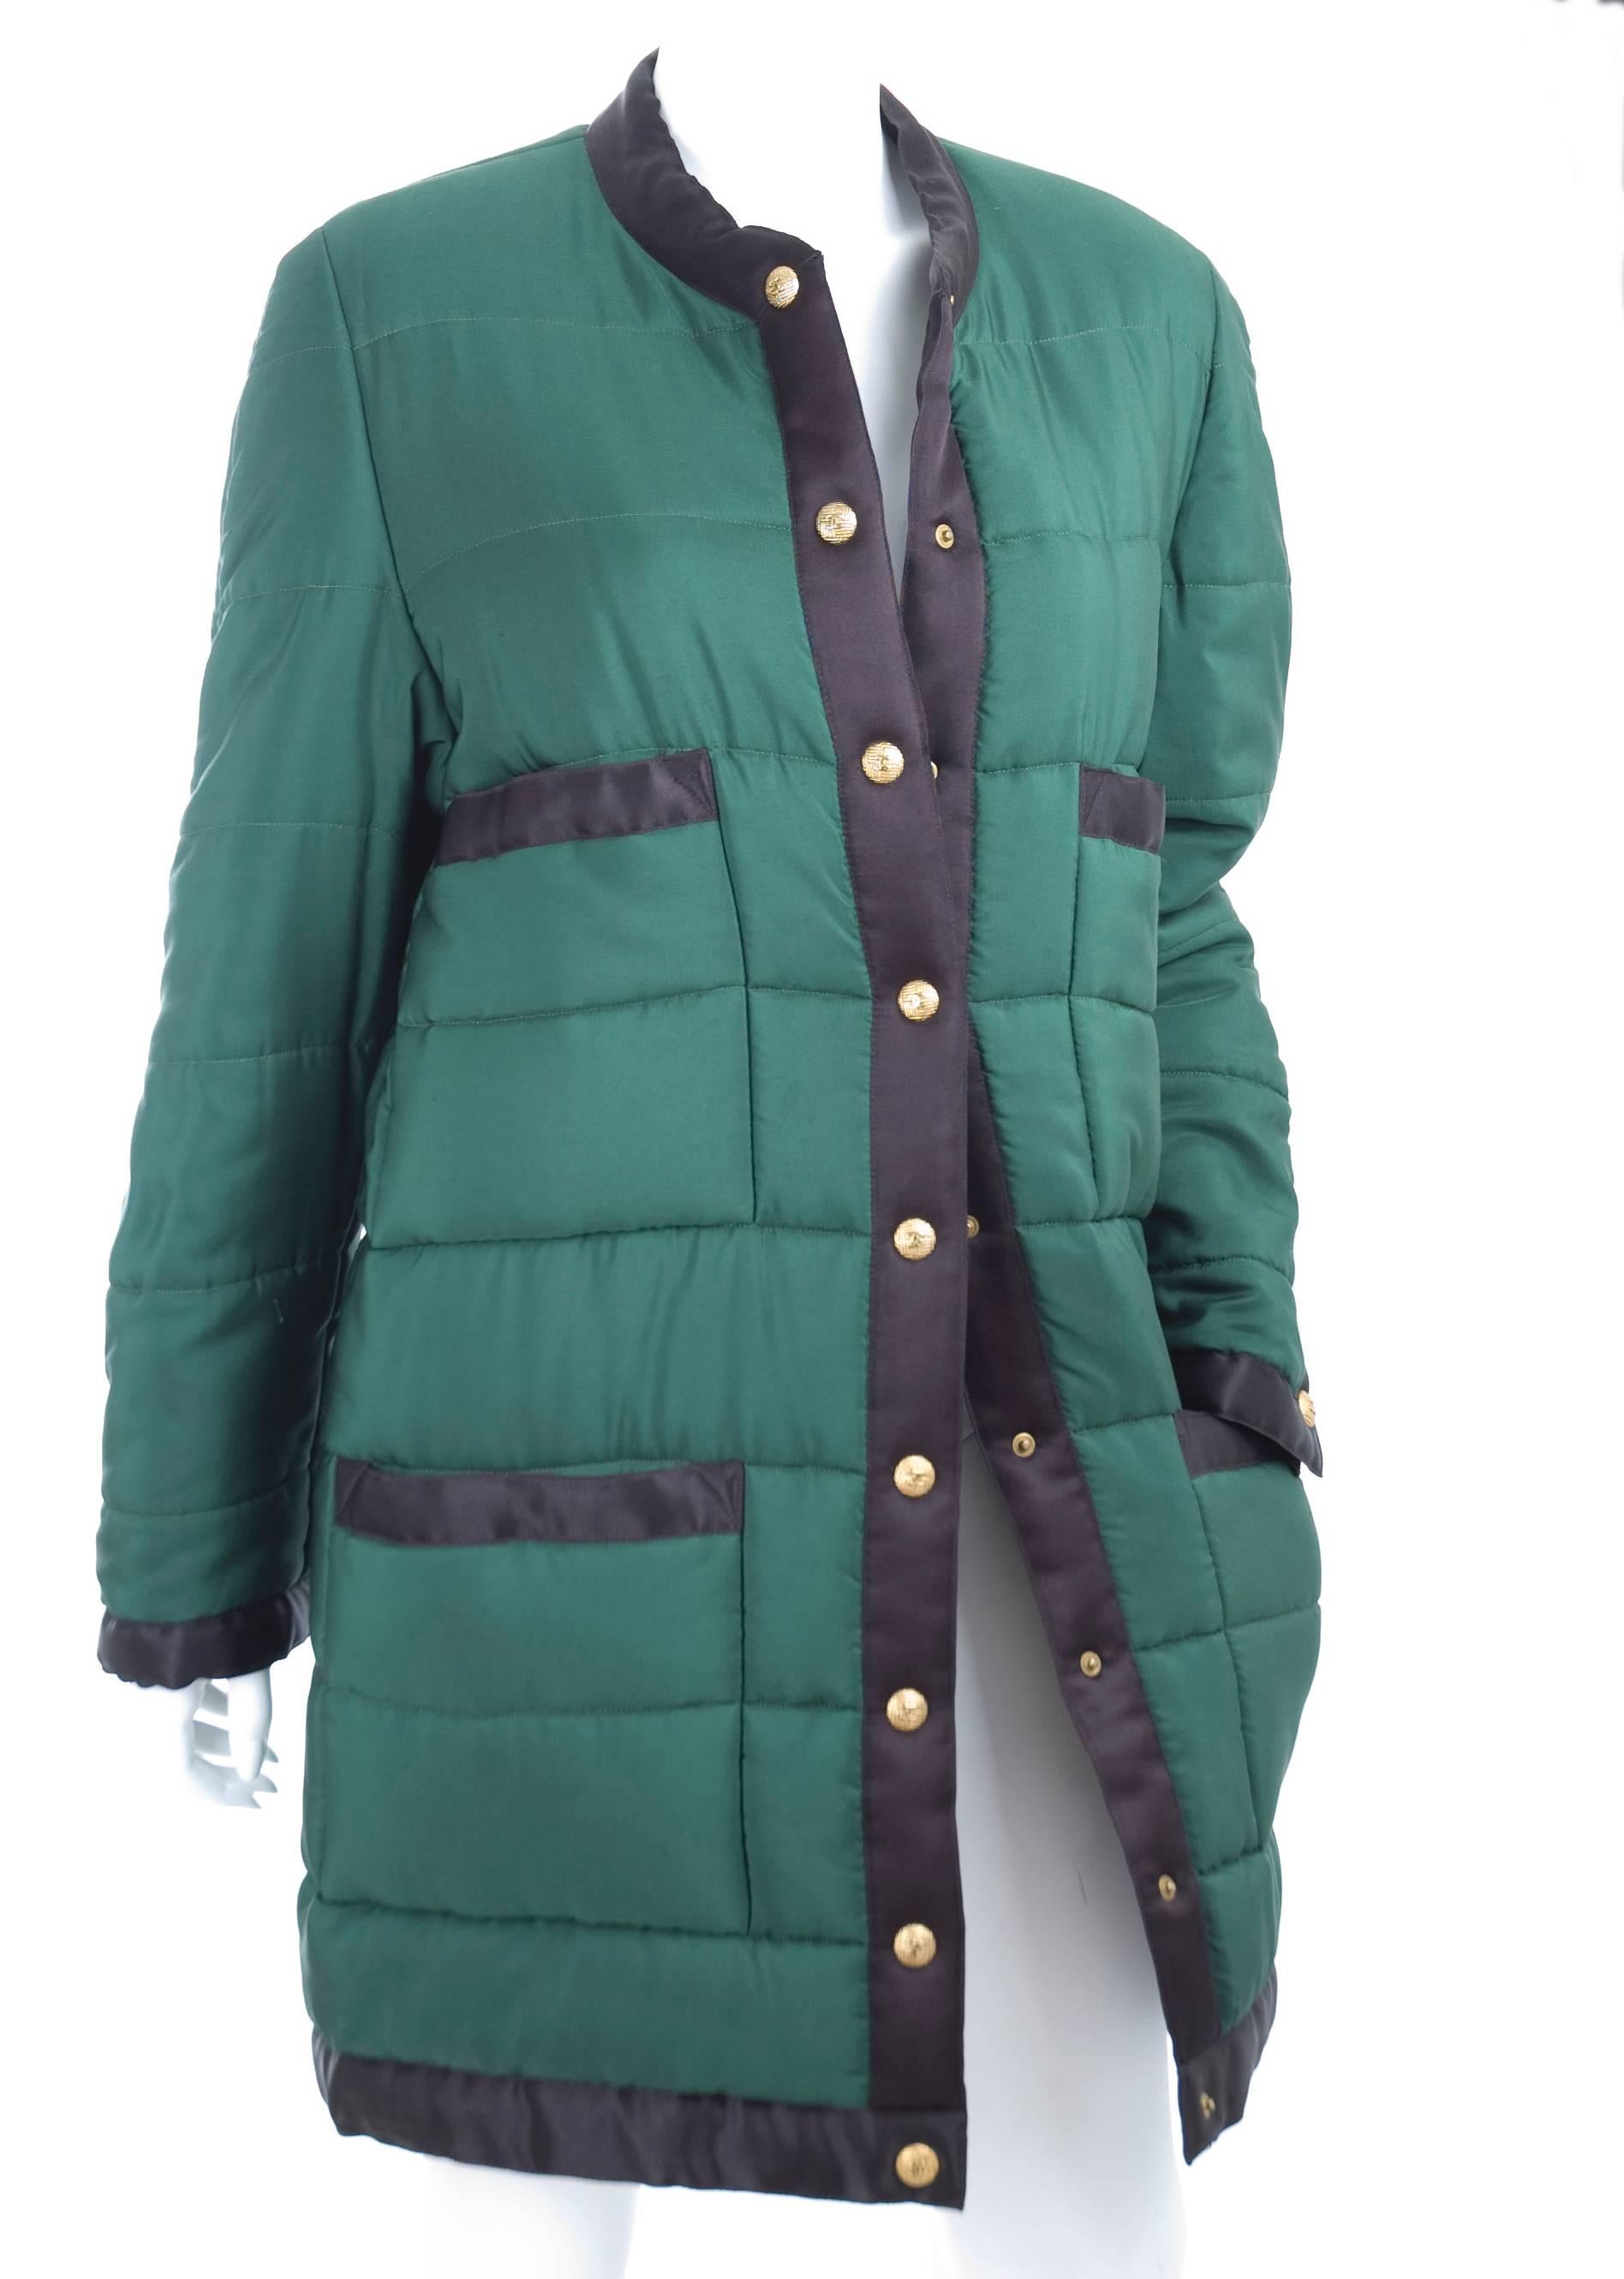 Vintage Chanel Quilted Puffer Coat in green with black trim and gold tone CC logo snap buttons.
As seen on Vogue 1981 on the cover in red.
Excellent condition - no flaws to mention.
Size label is missing - I think it is 44 F and 8